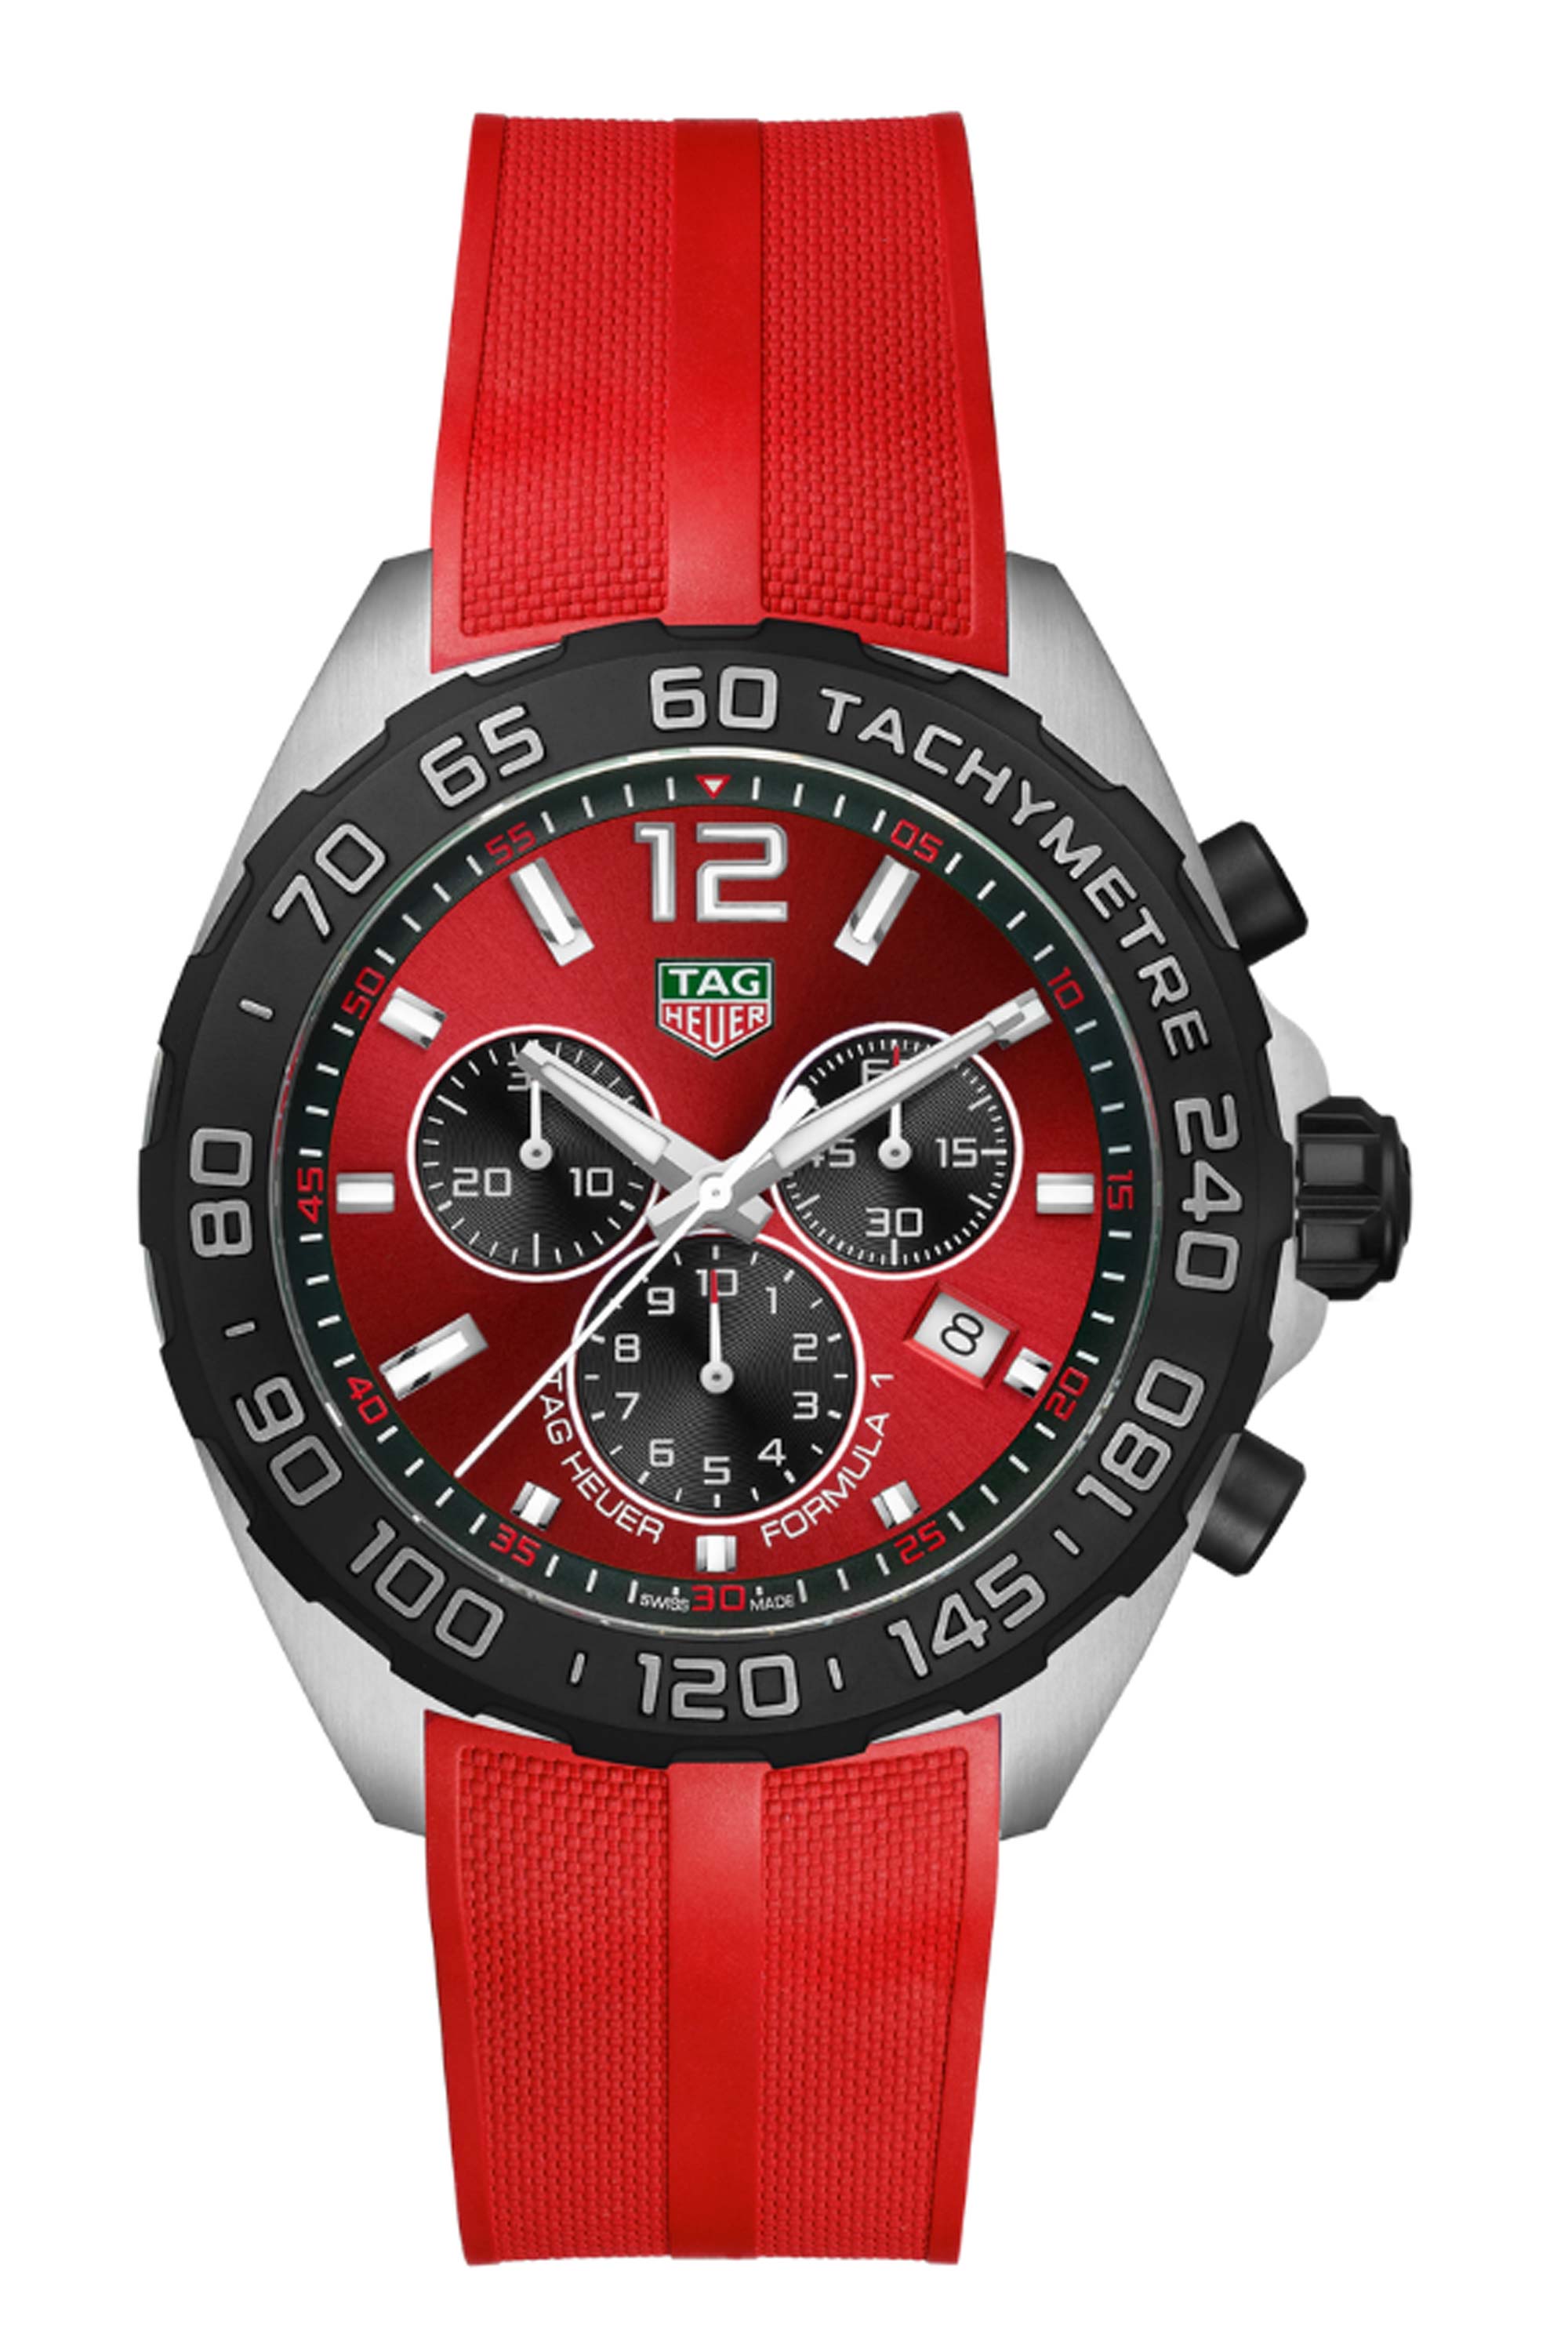 TAG Heuer is reviving an F1-inspired classic for its watch range this year